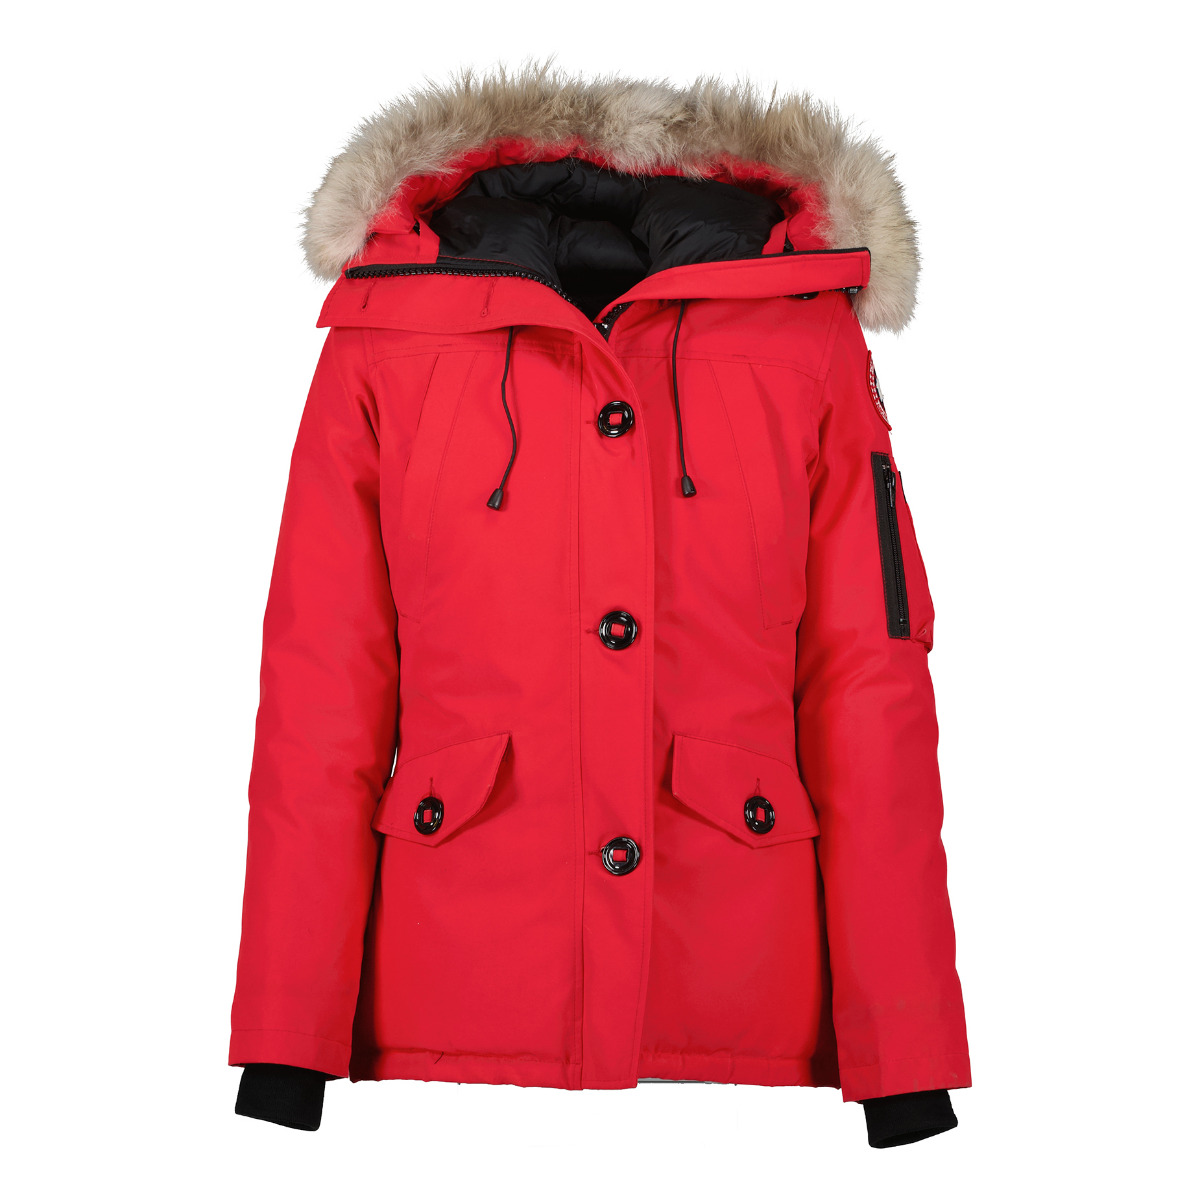 Montebello jacket Canada Goose Red size XS International in